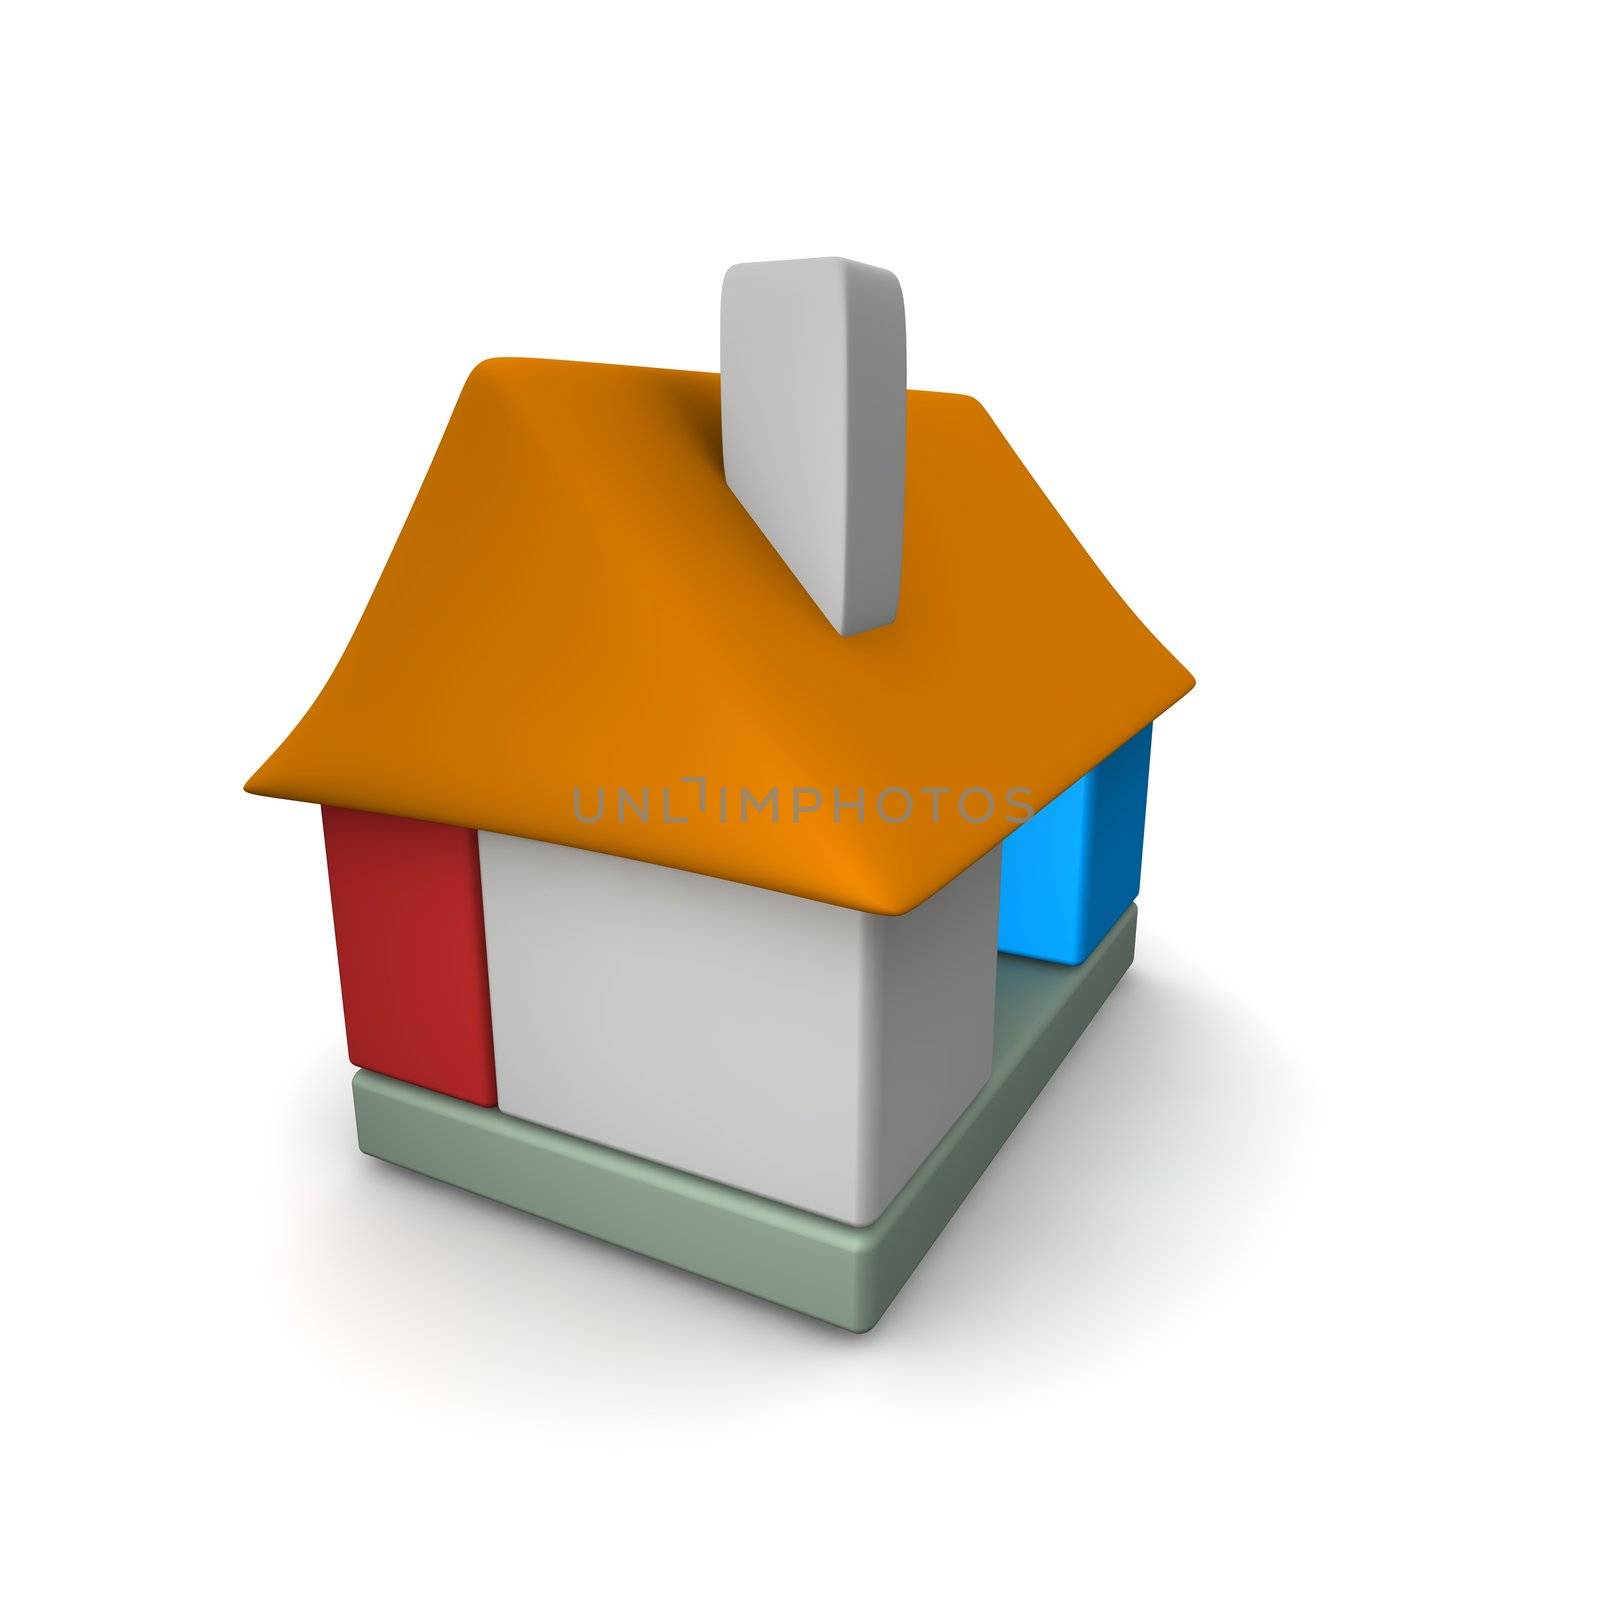 Colorful house icon built of blocks. 3d rendered illustration.